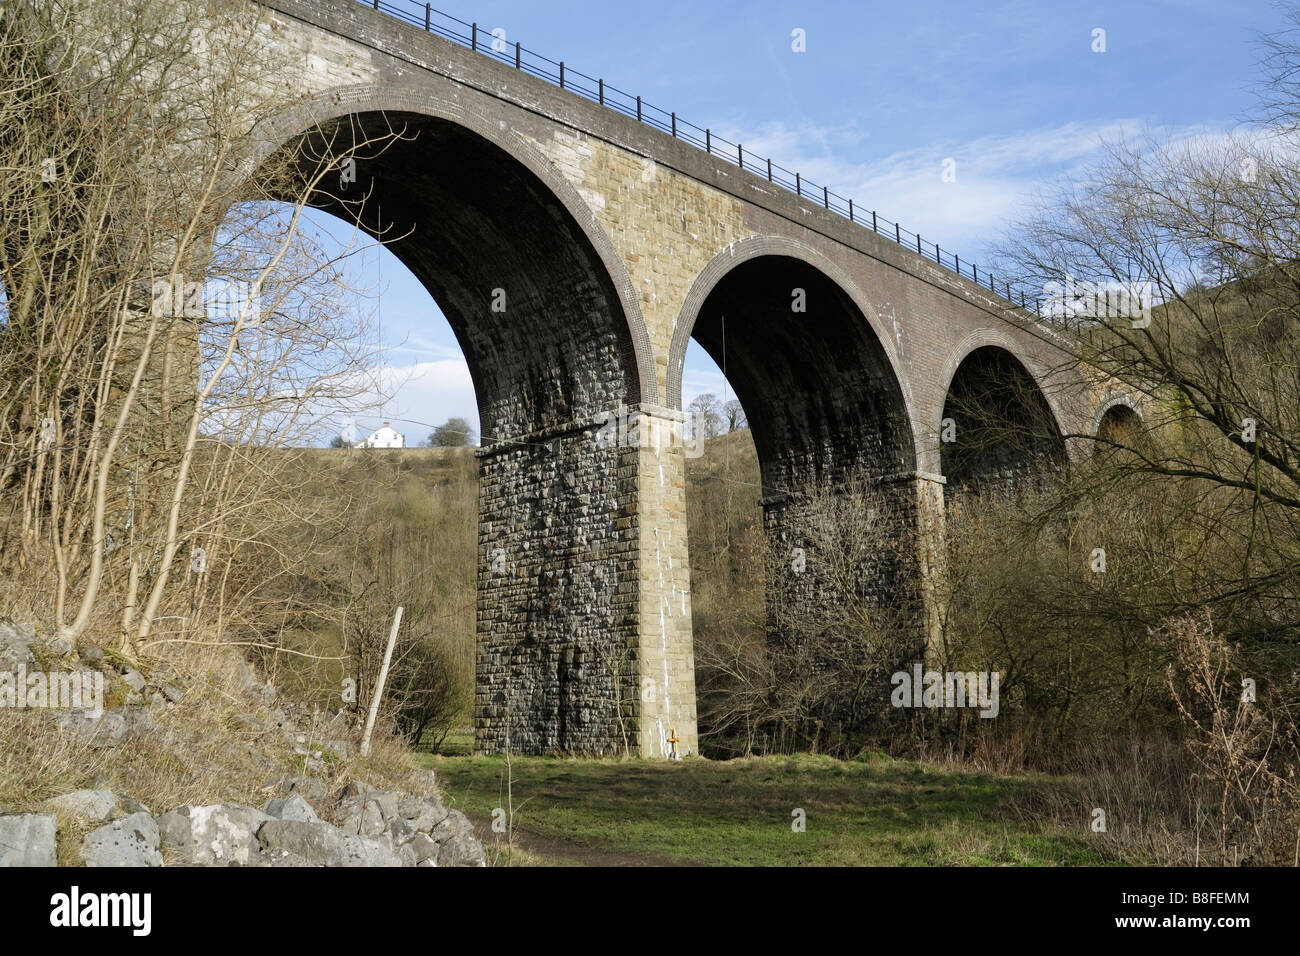 Monsal Head viaduct in Monsal Dale, Derbyshire England UK Peak district National Park, Disused railway bridge arches grade II listed building Stock Photo